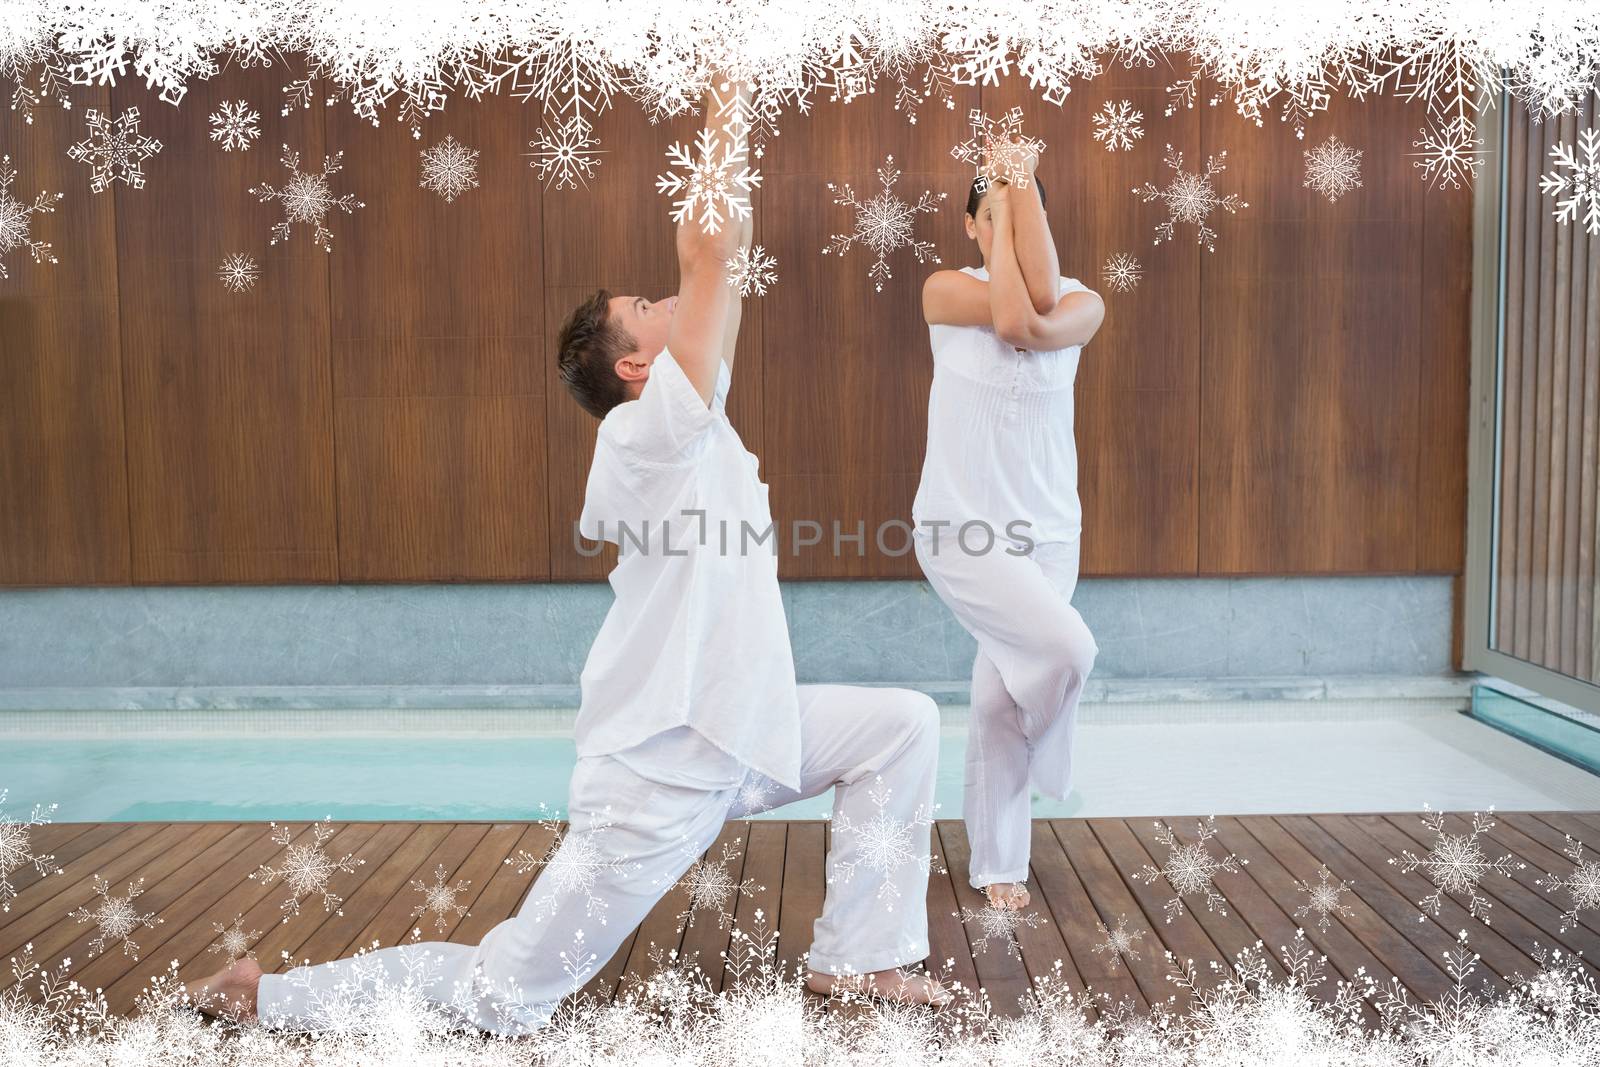 Peaceful couple in white doing yoga together against fir tree forest and snowflakes